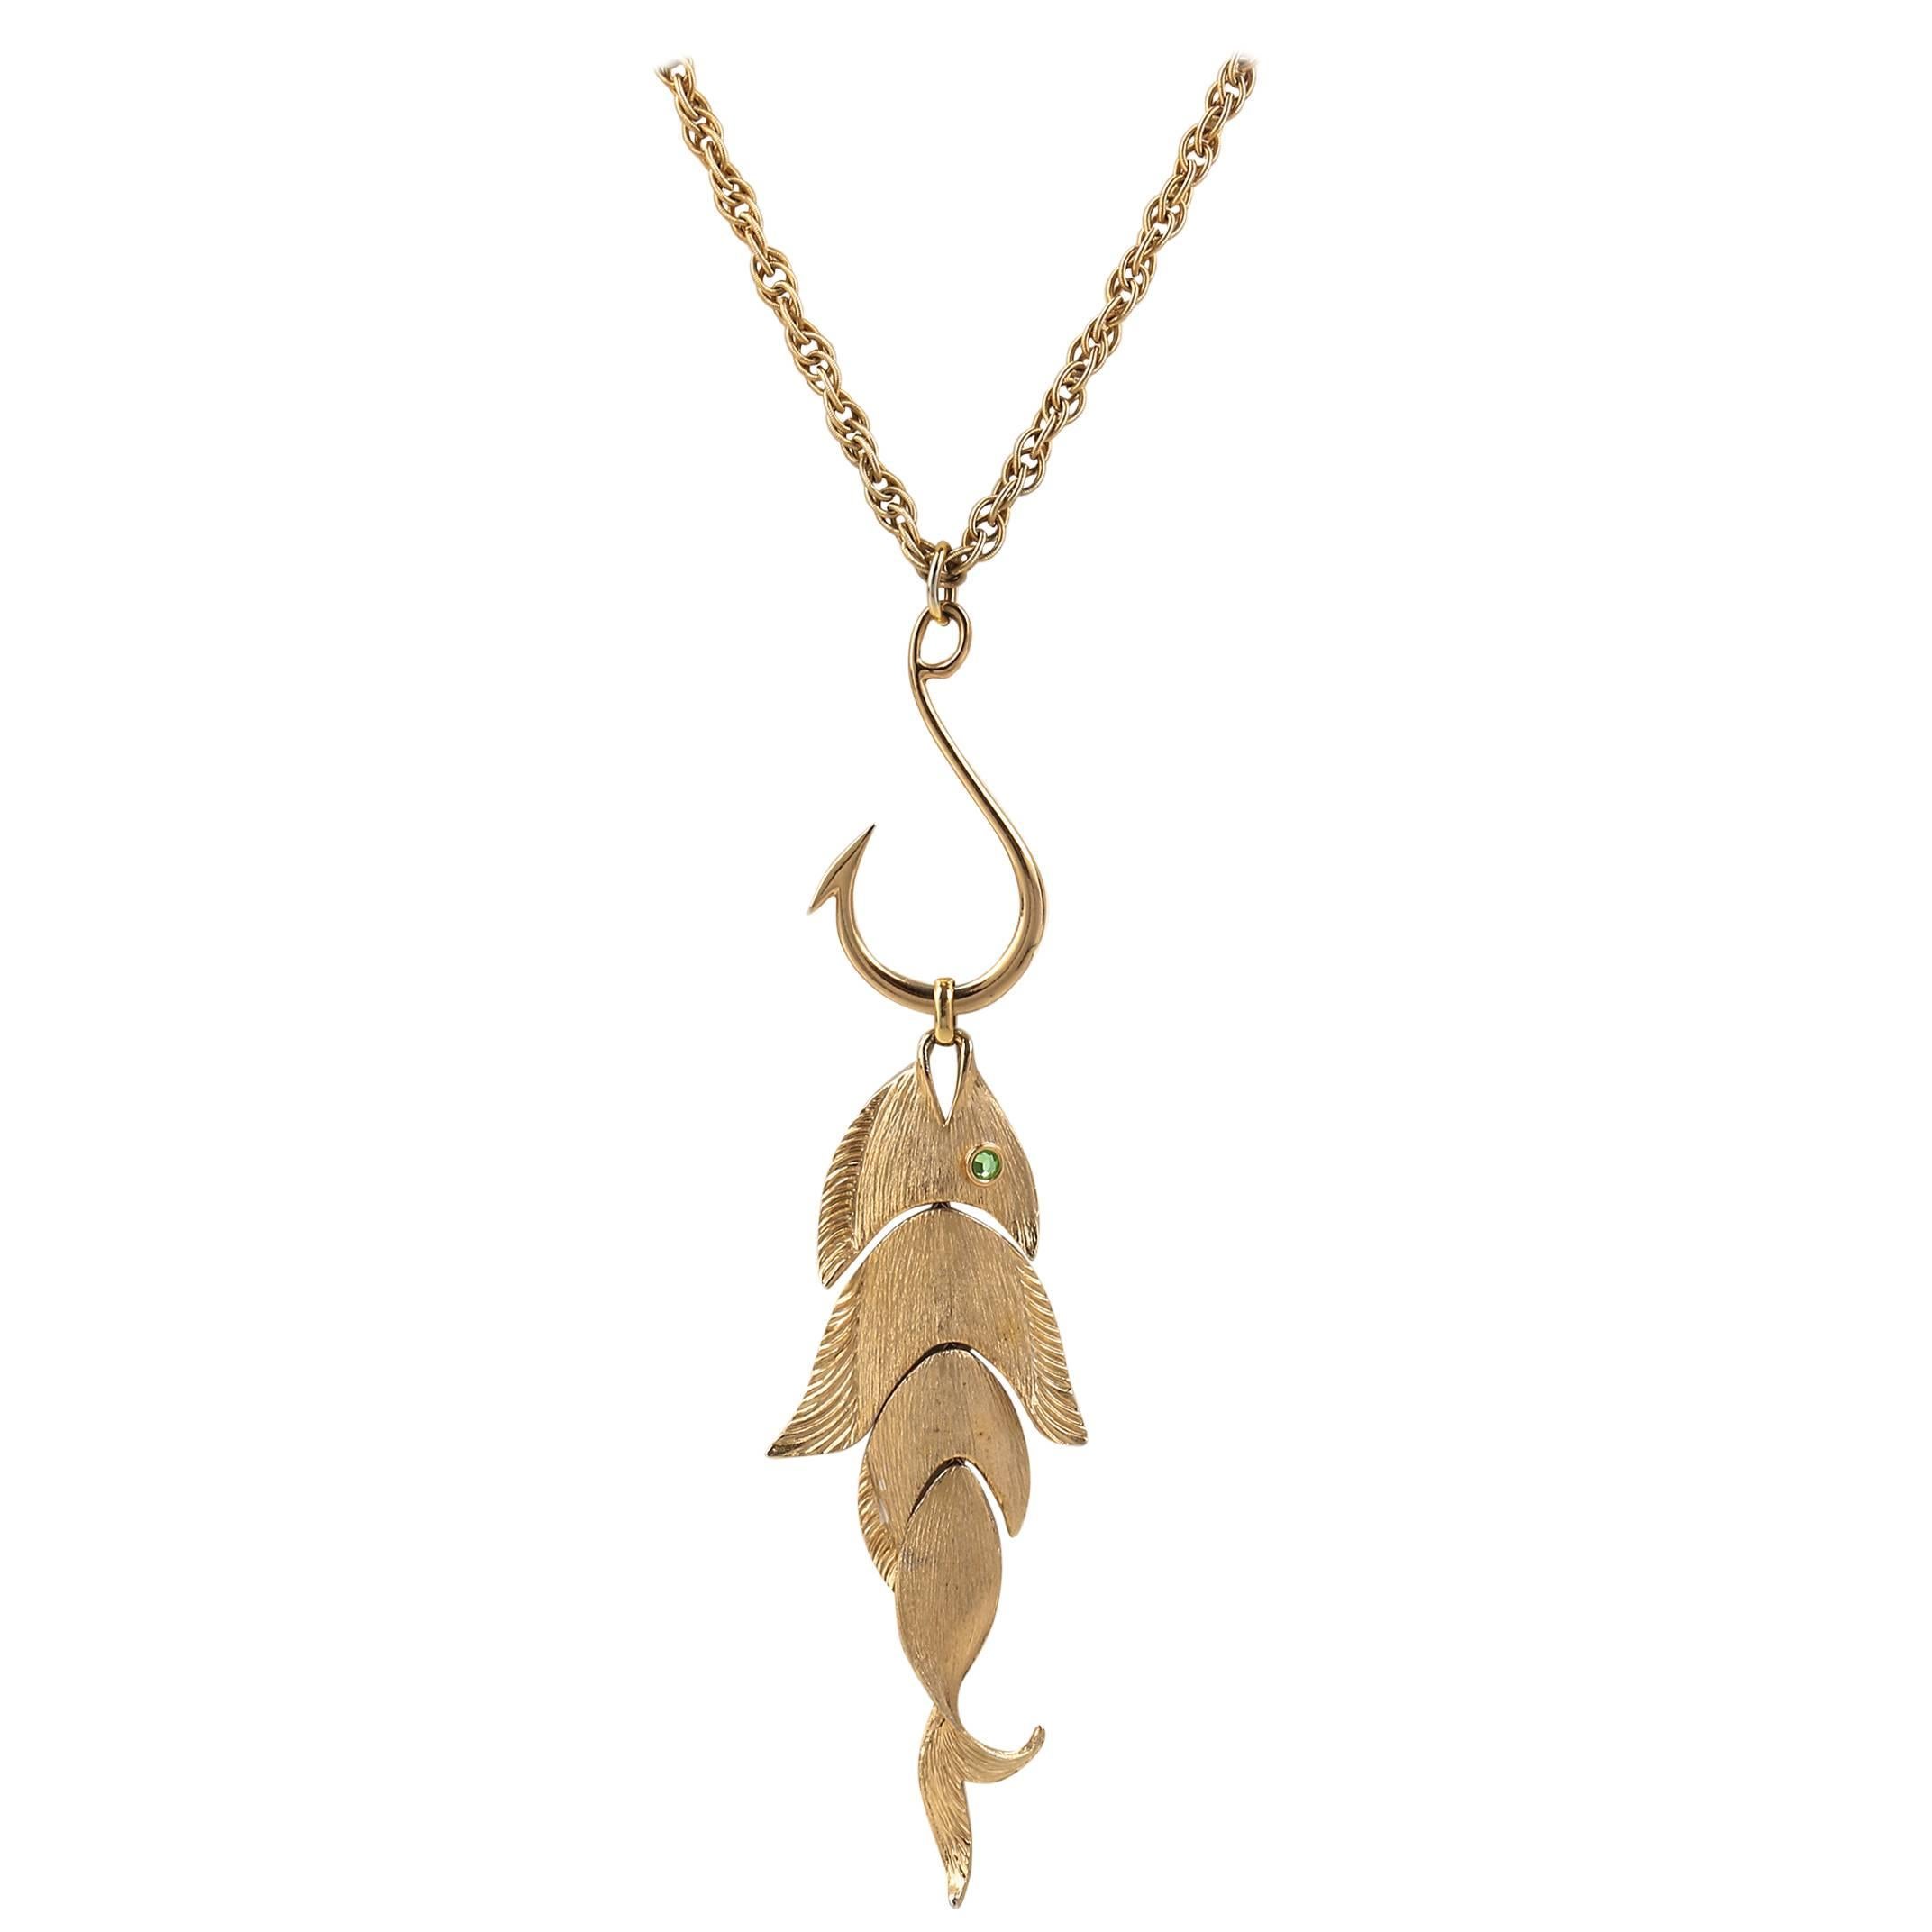 NAPIER c.1970's Huge Gold Articulated Fish w/ Hook Pendant Statement Necklace